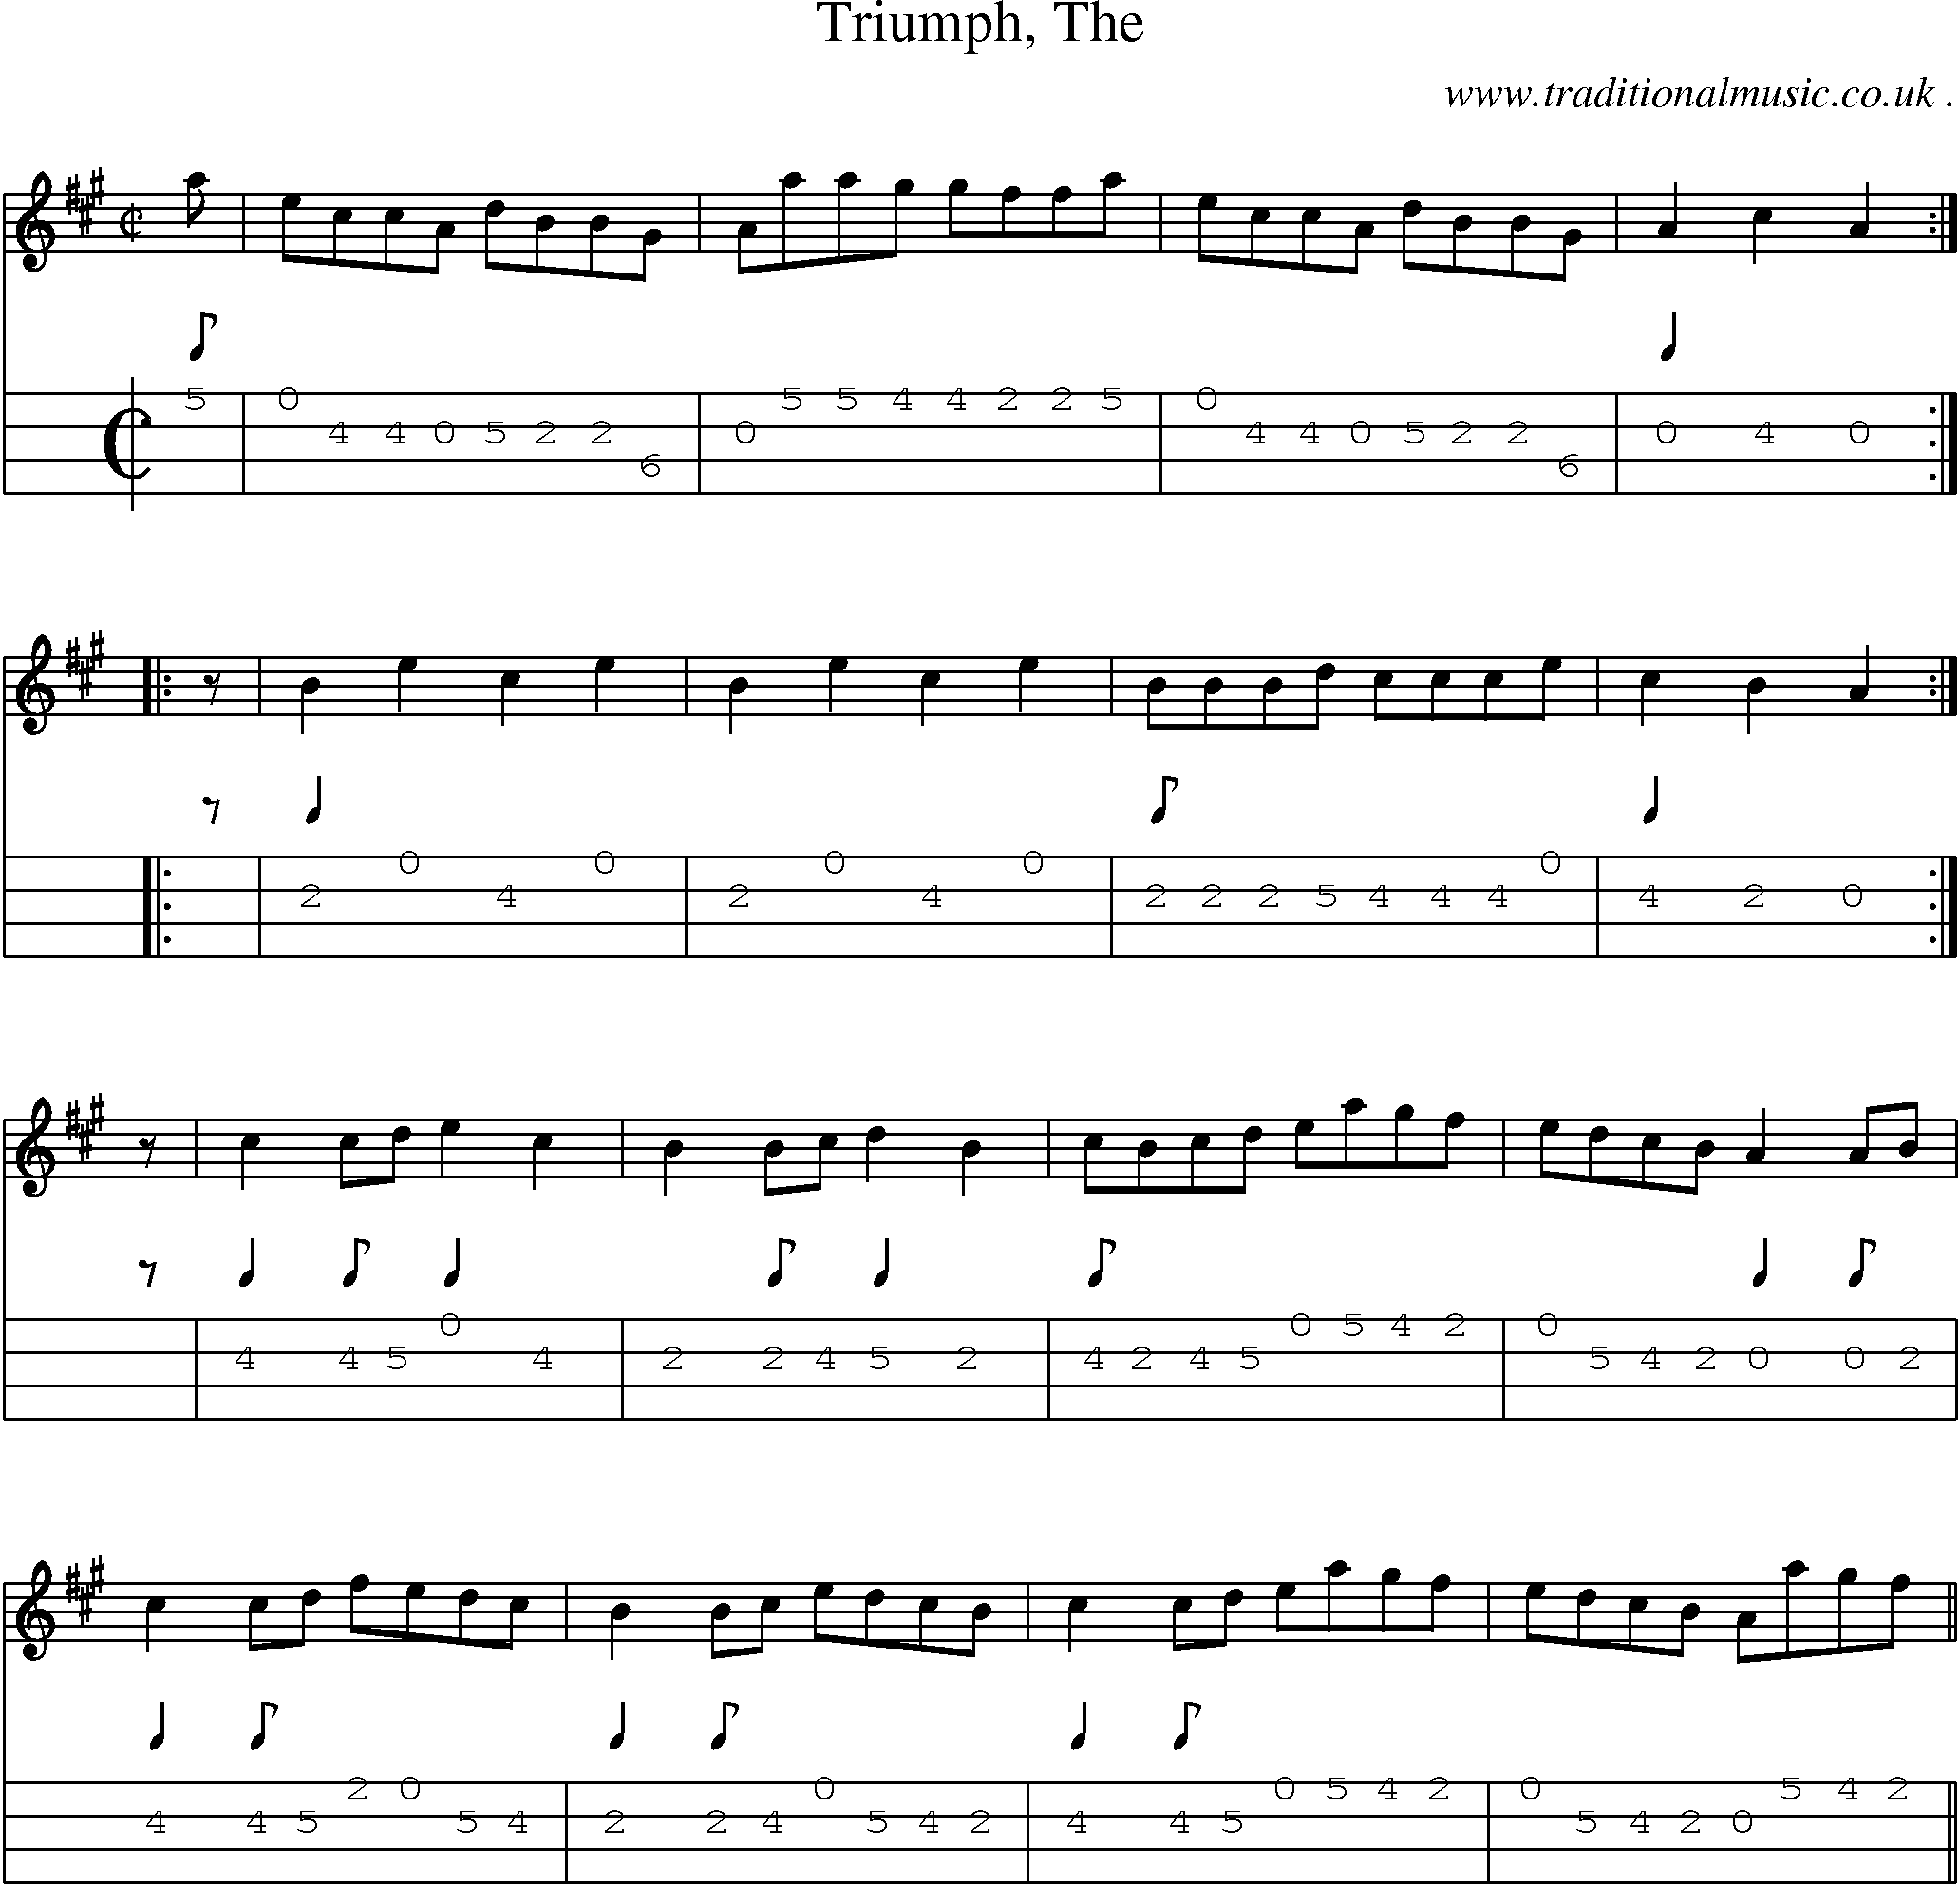 Sheet-music  score, Chords and Mandolin Tabs for Triumph The